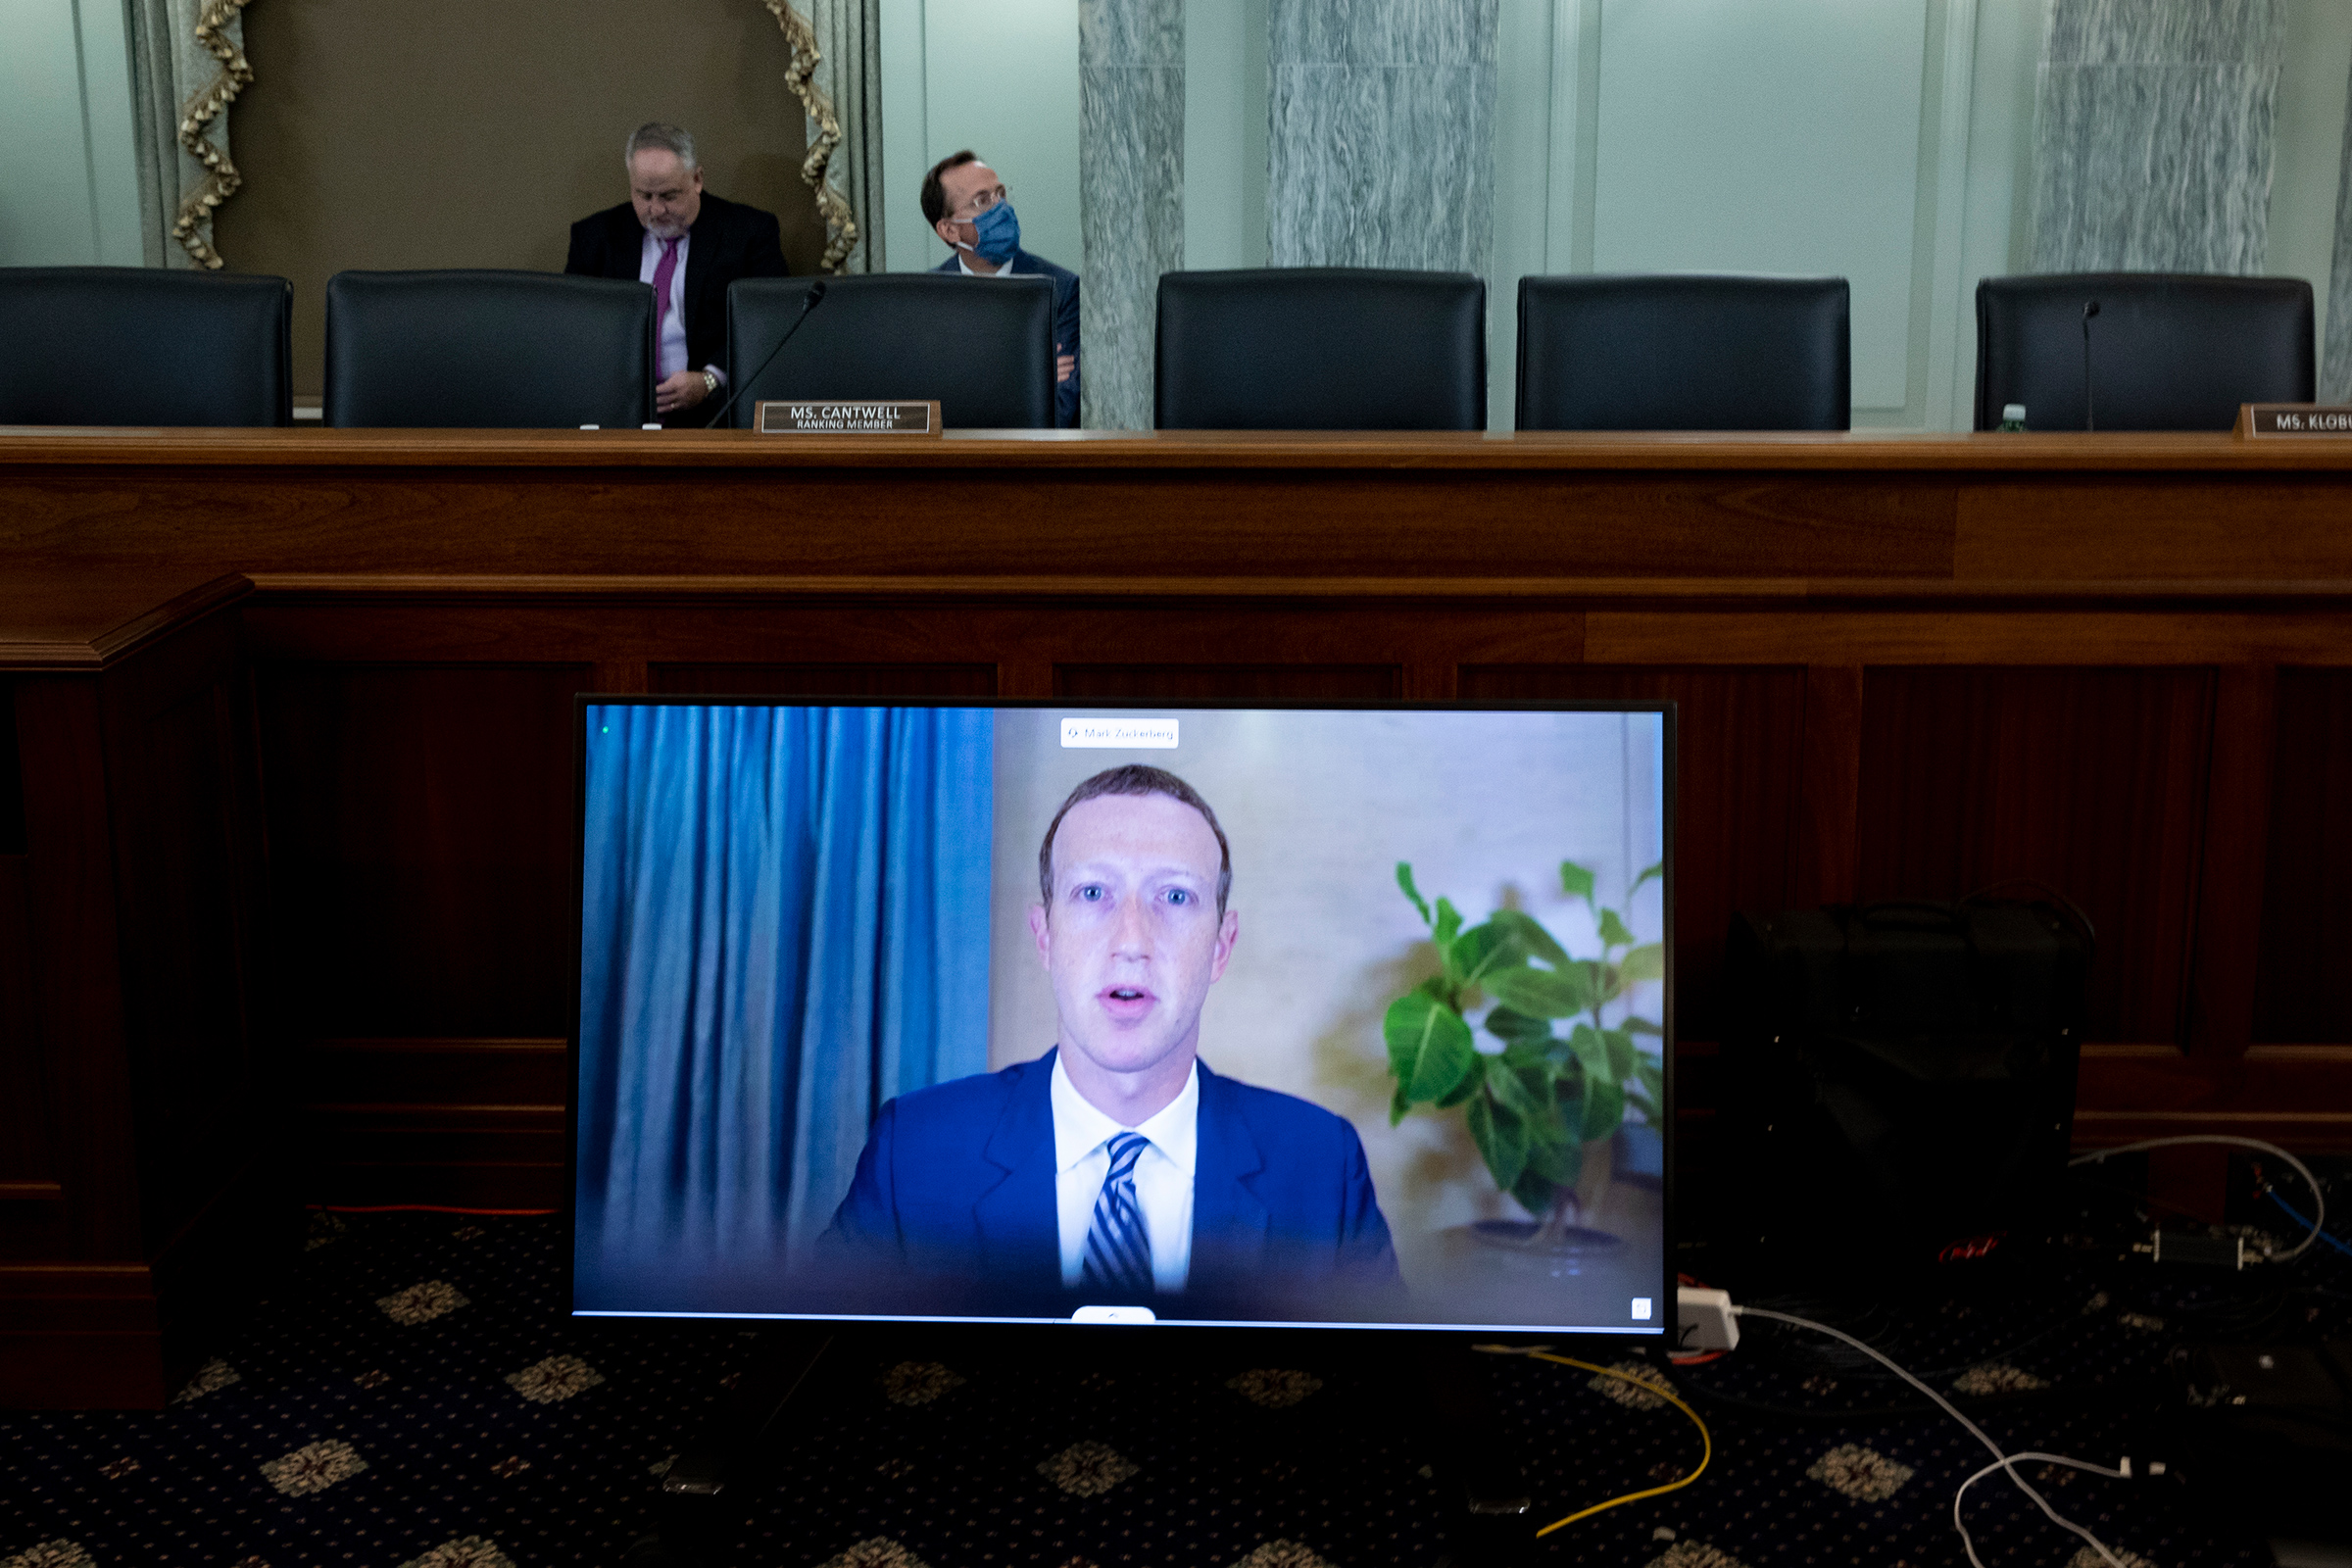 Mark Zuckerberg, founder and CEO of Facebook, testifying remotely during a Senate hearing on Section 230, on Oct. 28